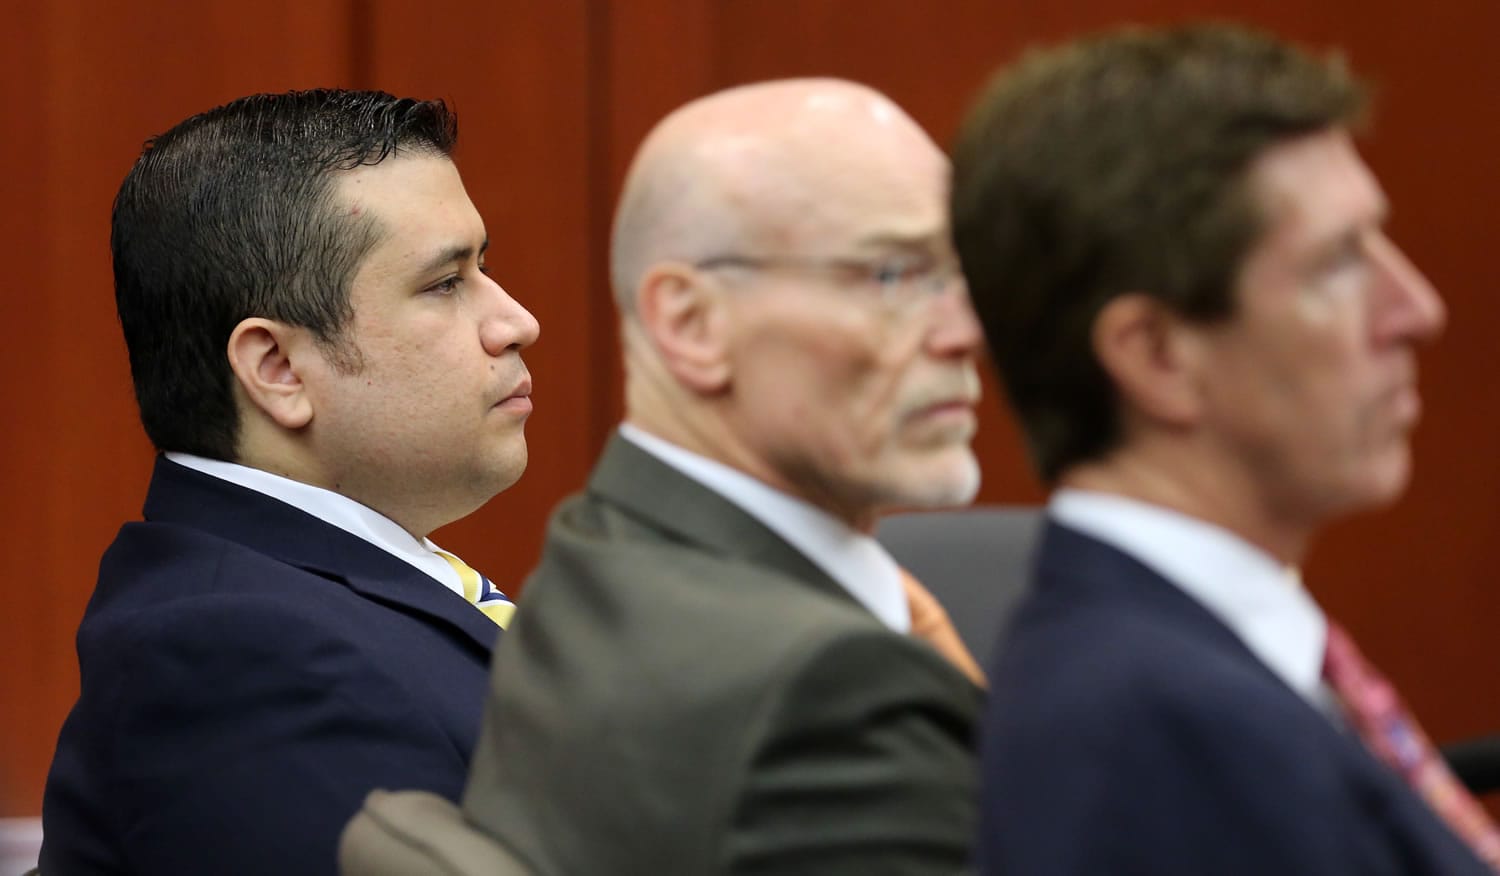 George Zimmerman, left, sits with his defense lawyers, Don West, center, and Mark O'Mara, during the 15th day of his trial in Seminole circuit court in Sanford, Fla., on Friday.